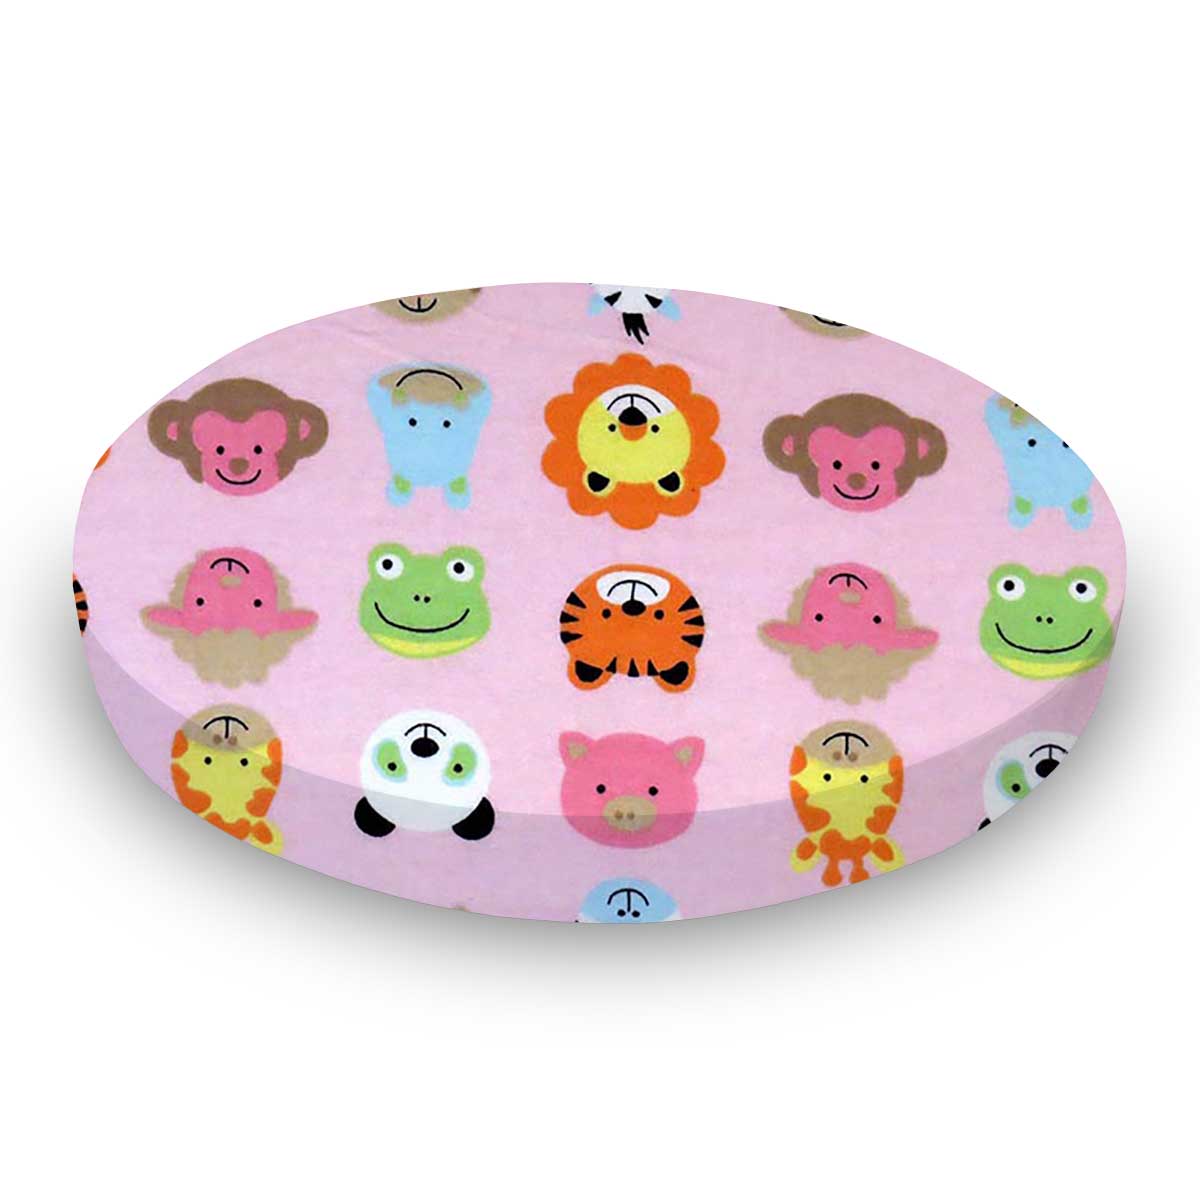 Oval Crib (Stokke Sleepi) - Animal Faces Pink - Fitted  Oval